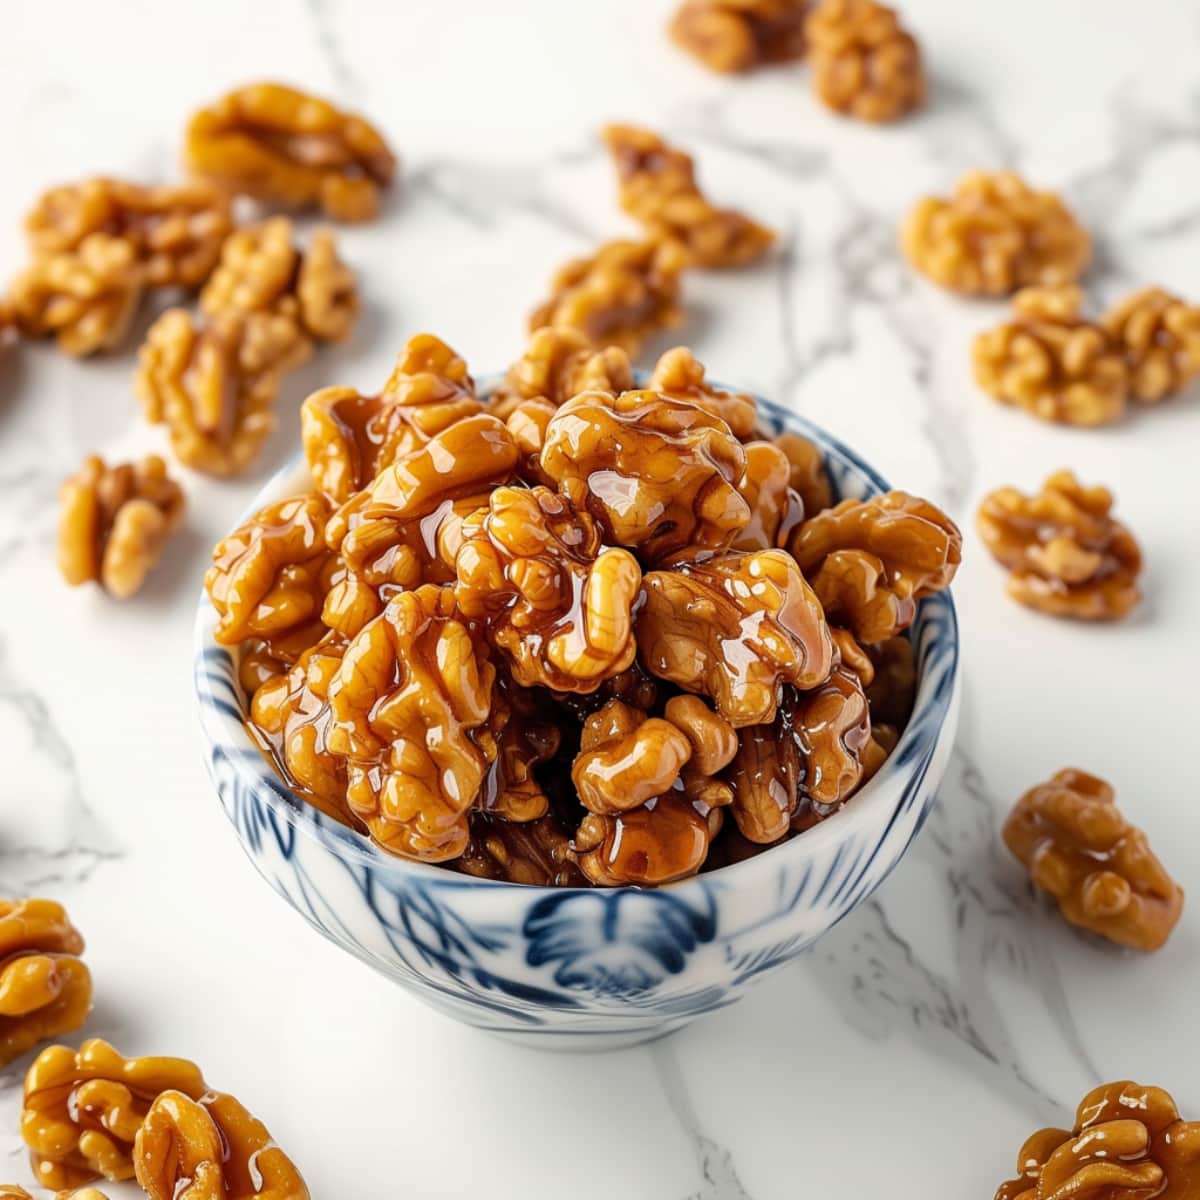 Candied caramelized walnuts with cinnamon and sea salt